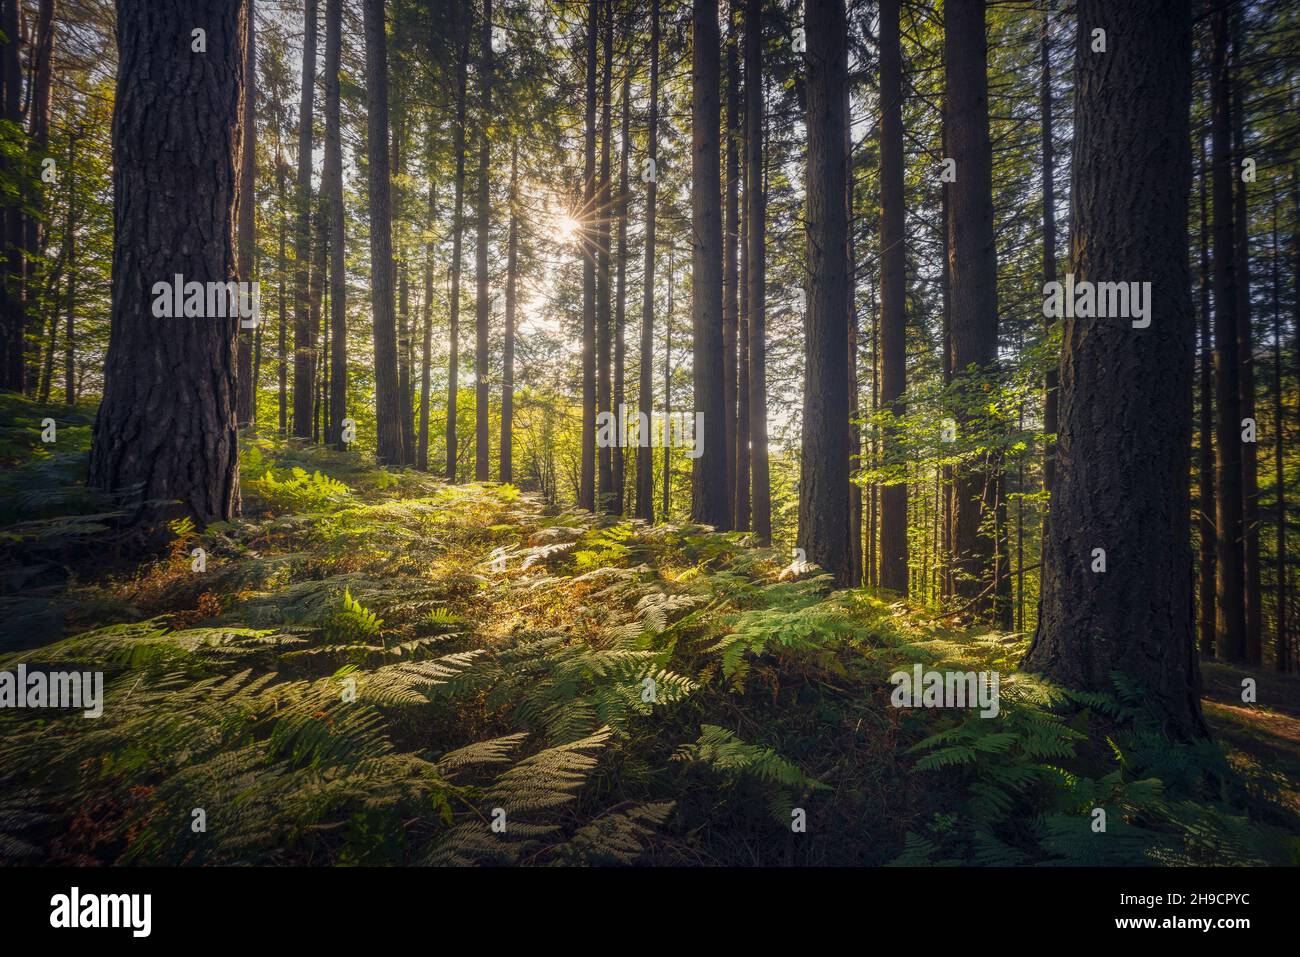 Acquerino nature reserve forest. Douglas fir trees and ferns in the morning, autumn season, Apennines, Tuscany region, Pistoia province, Italy, Europe Stock Photo